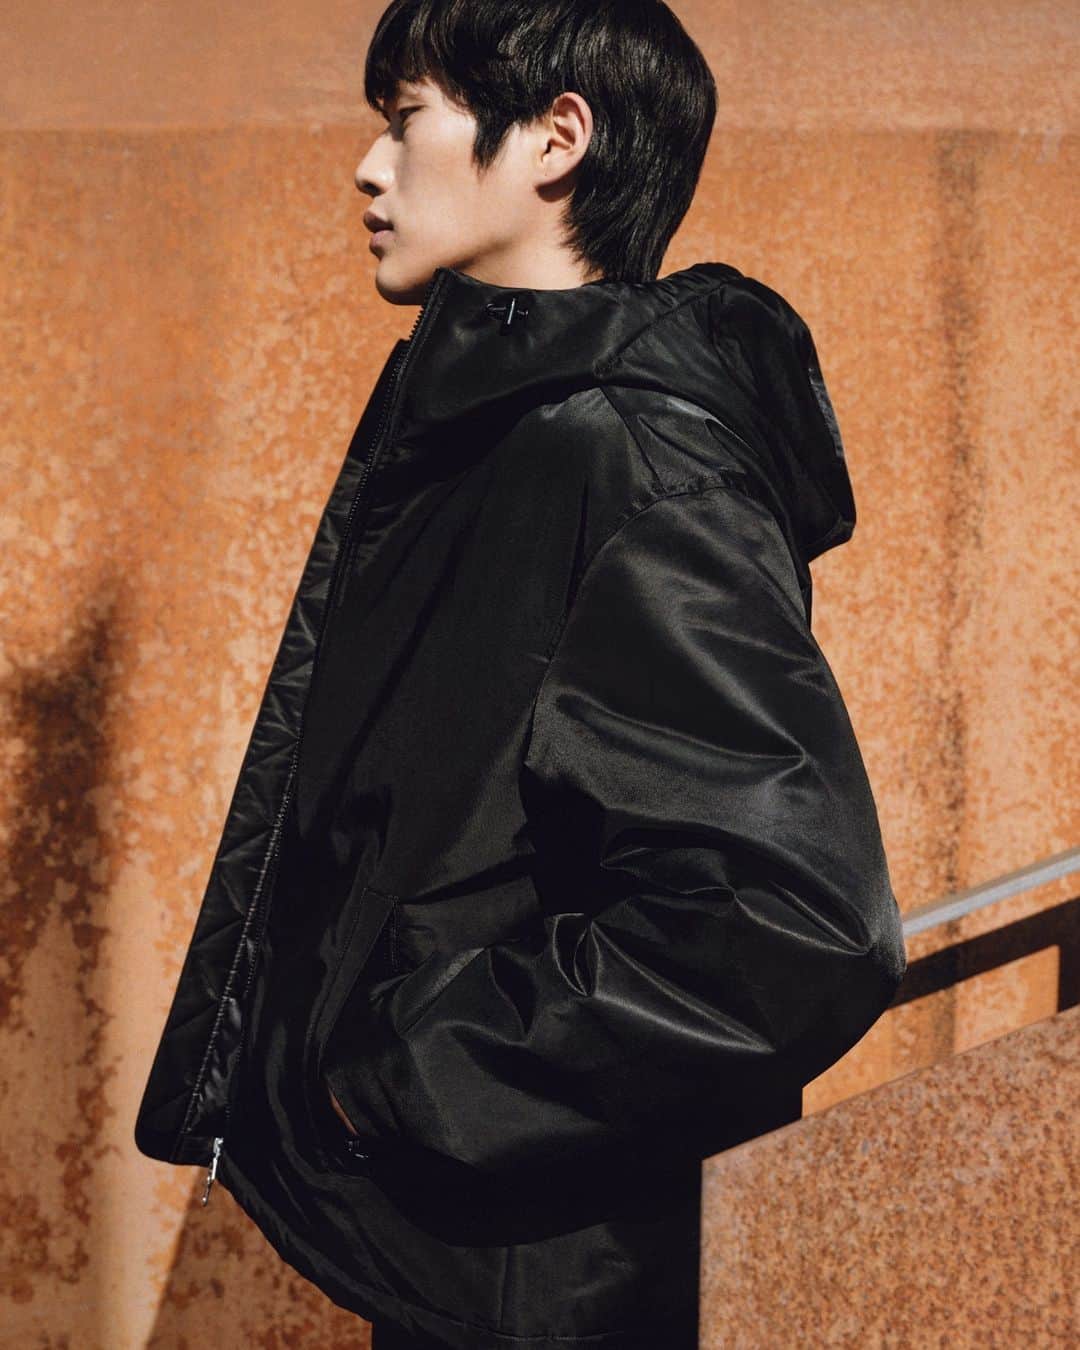 ARKETのインスタグラム：「This Active Hooded Jacket designed for a short, boxy fit inspired by bomber jackets. It features a mid-weight high-loft padding and adjustable hood hem and cuffs for excellent insulation. The two-way zip opening, roomy pockets and top stitchings add to a modern utilitarian feel. Explore the full outerwear collection: link in bio. - #ARKET」